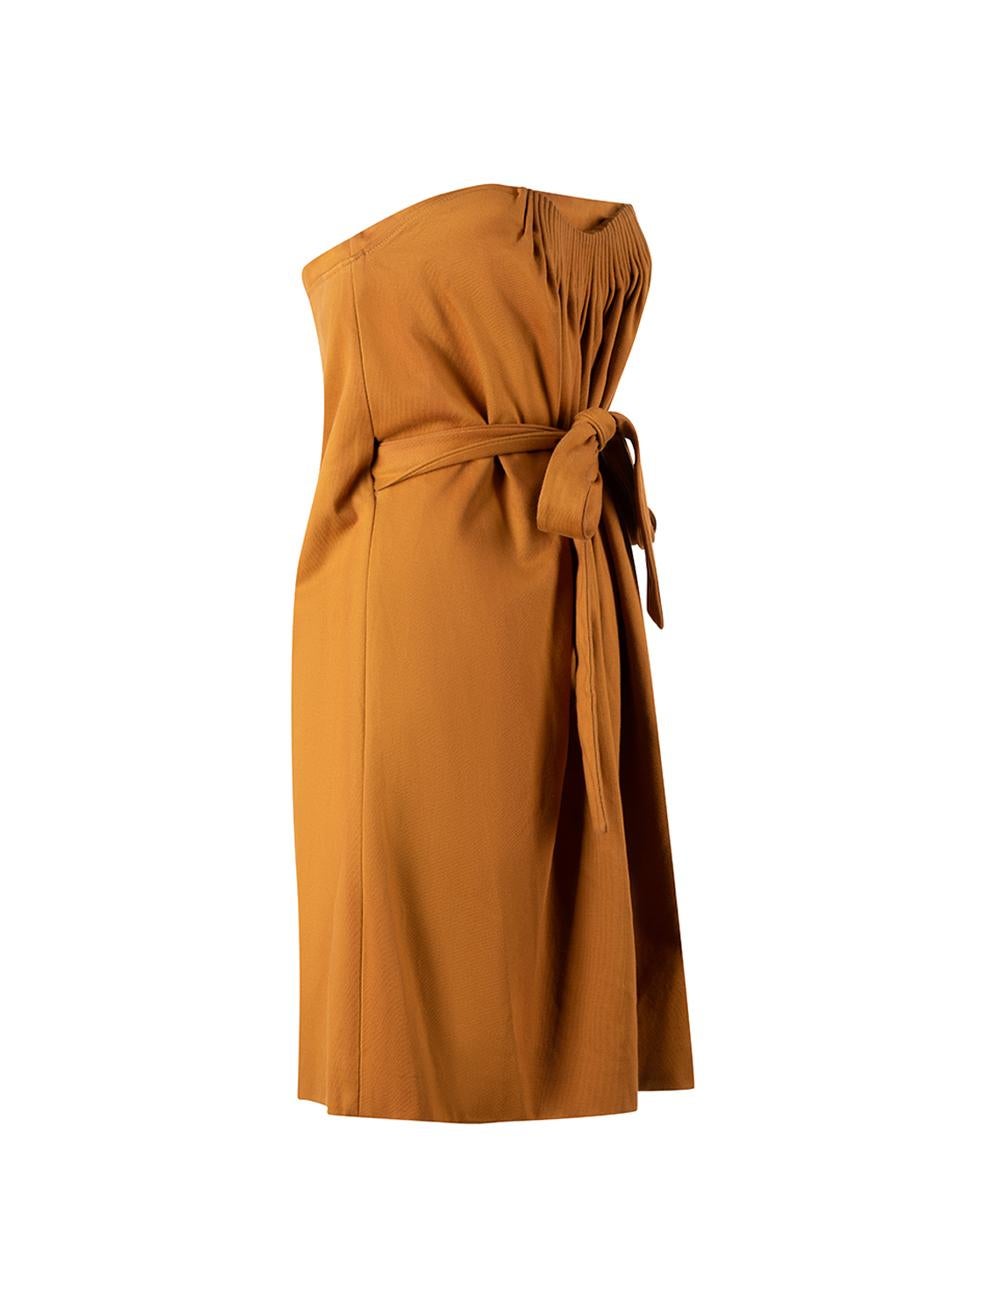 CONDITION is Very good. Minimal wear to dress is evident. Minimal wear to right-side of neck-edge with small discoloured marks and the interior zip is broken on this used Stella McCartney designer resale item.



Details


Camel

Cotton

Mini